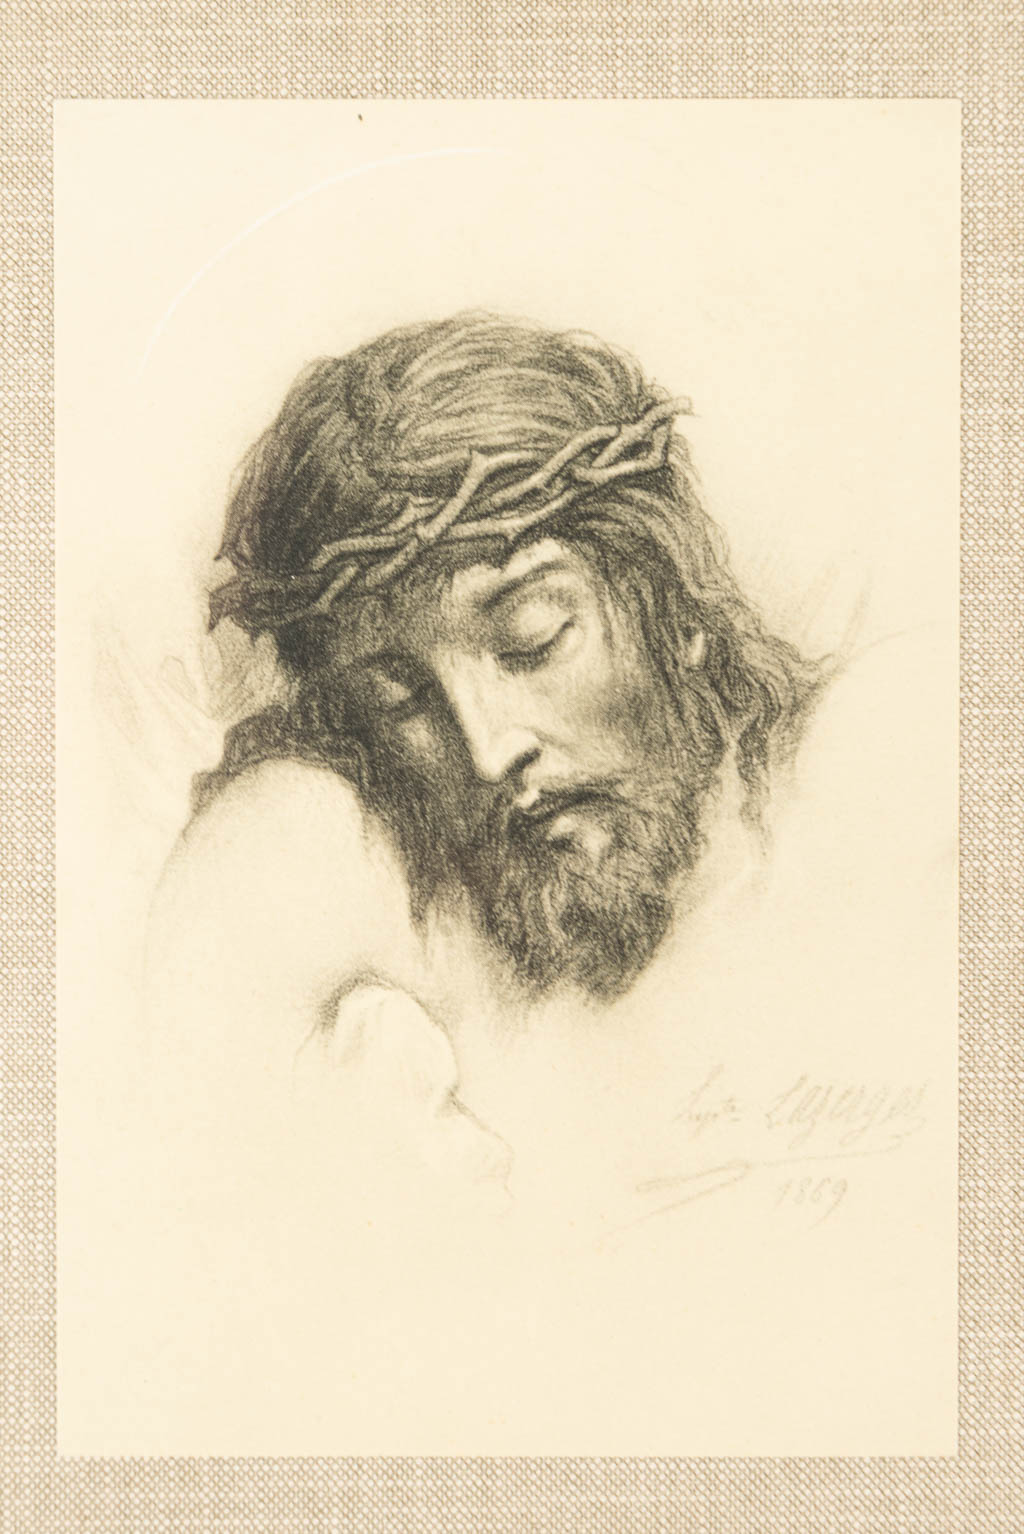 Hippolyte LAZERGES (1817-1887) a 14 piece station of the cross, 